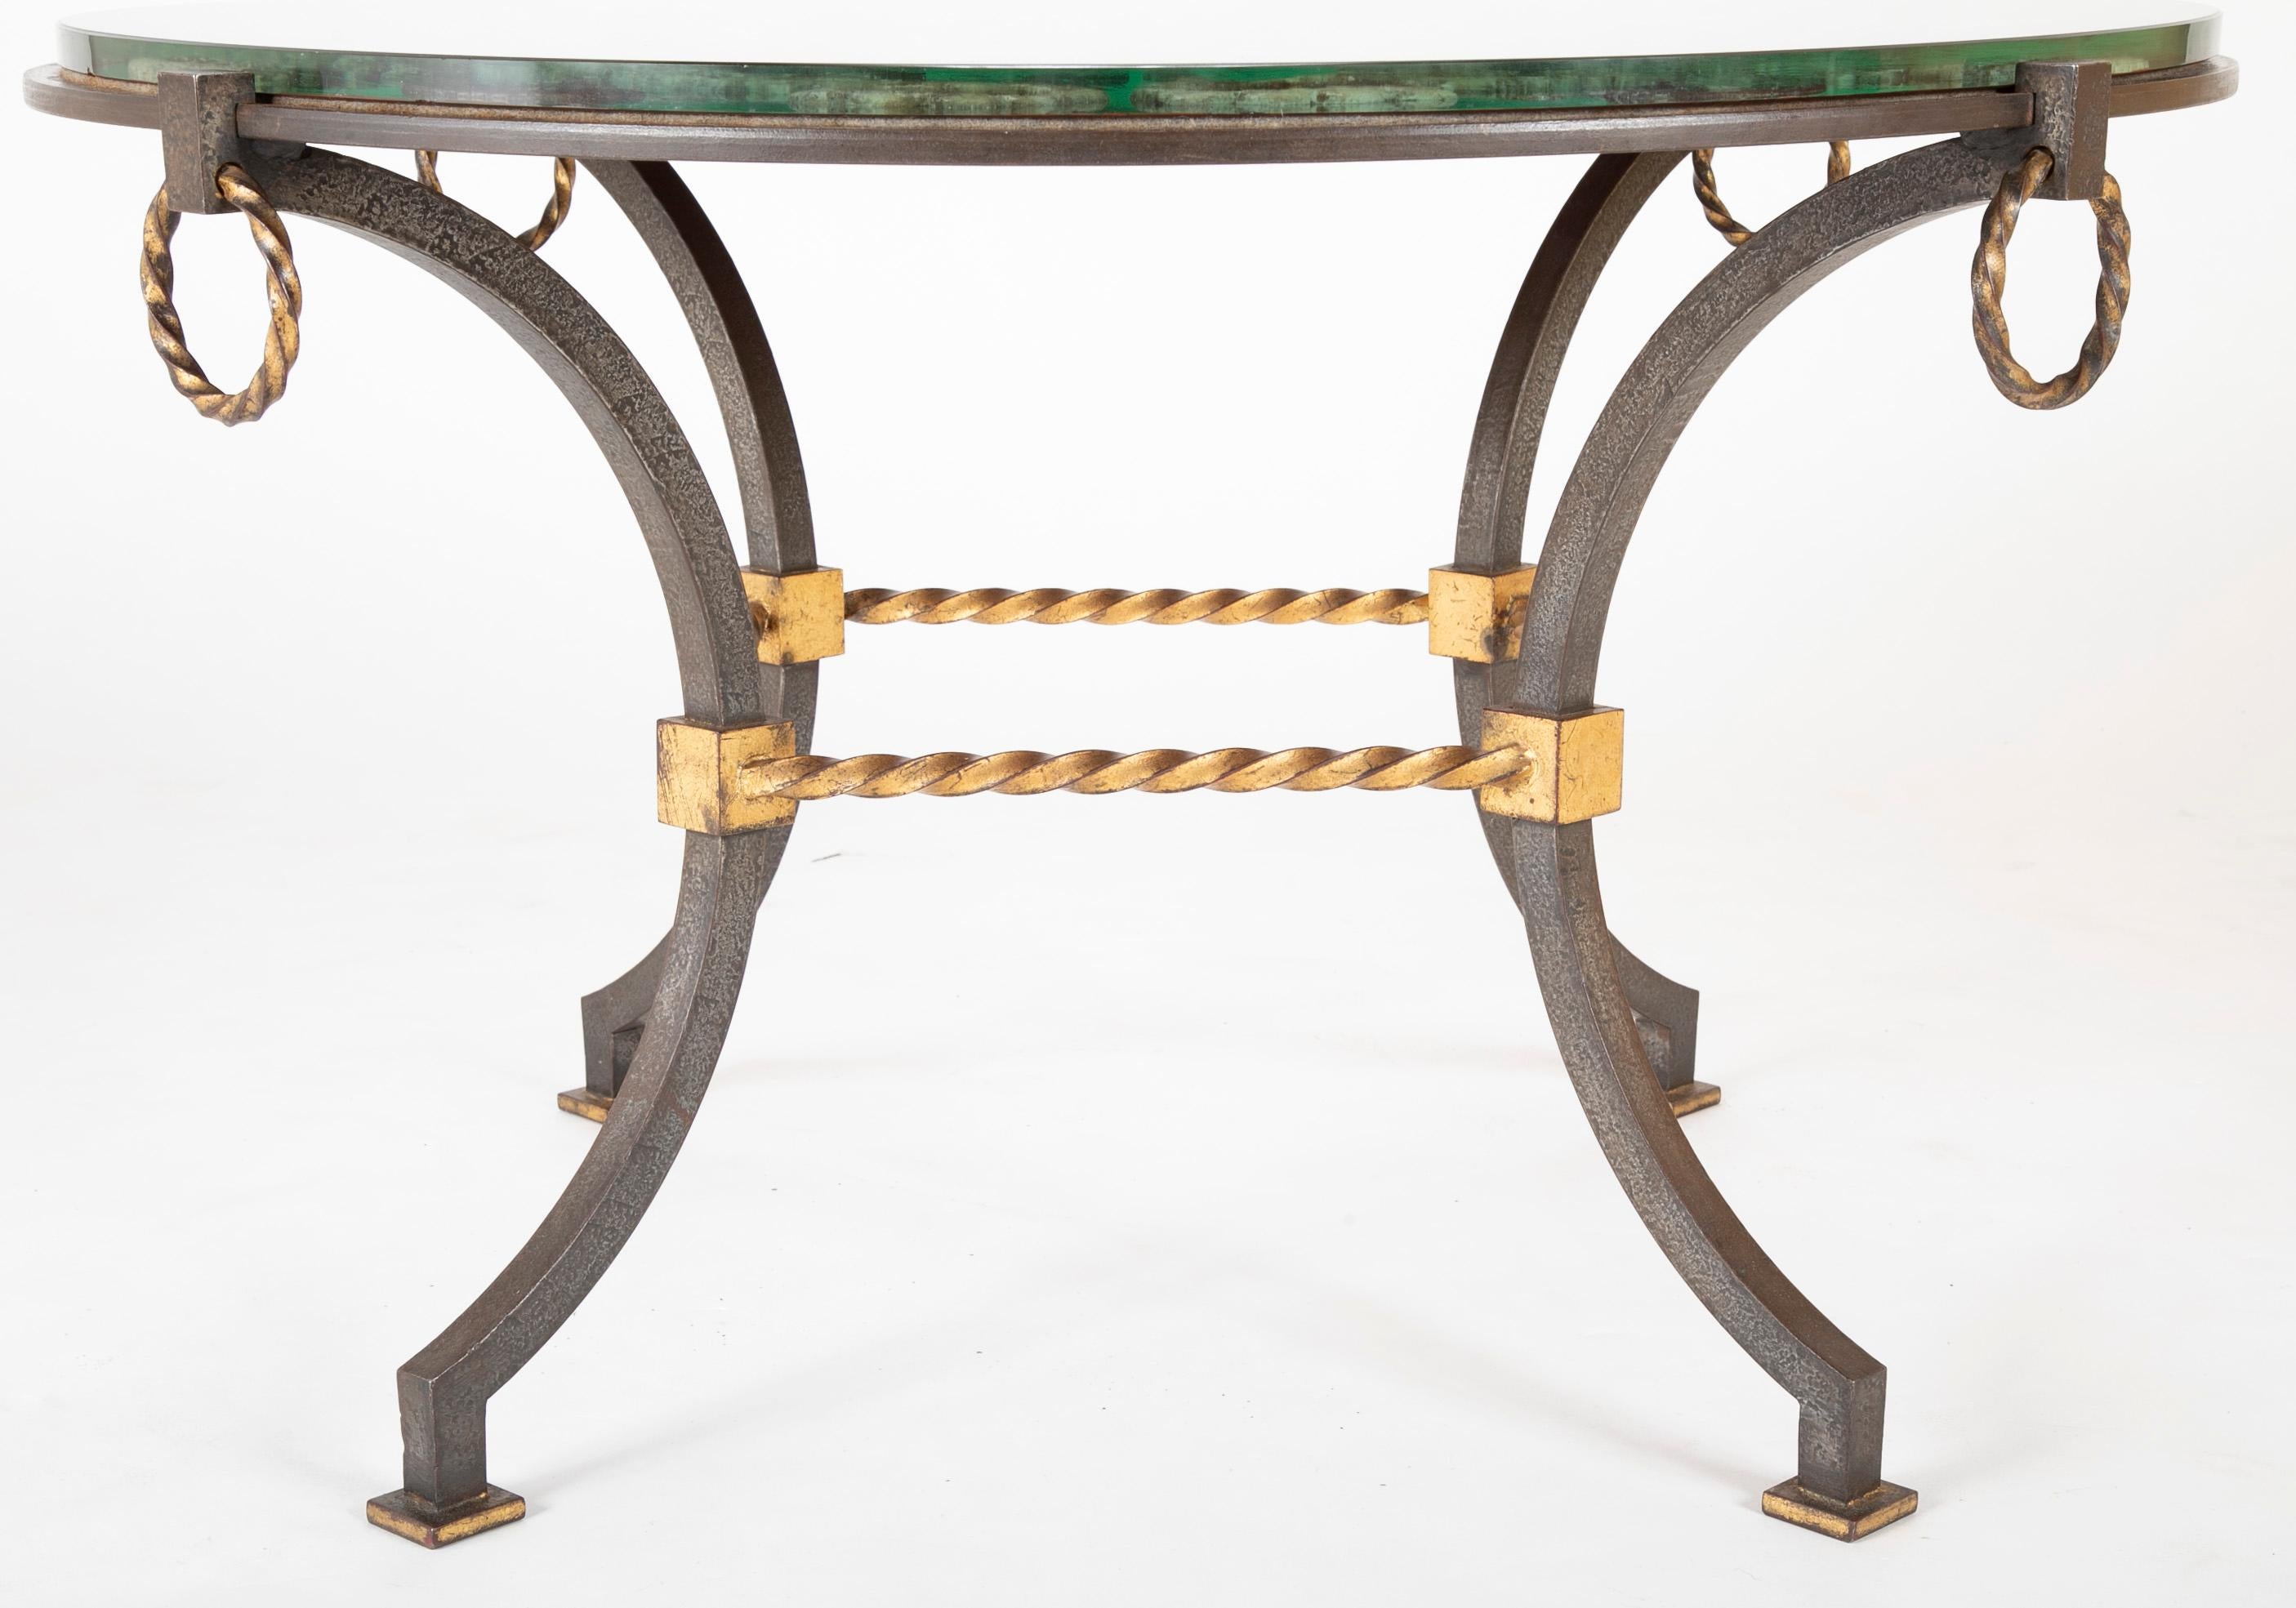 Neoclassical Revival Round Wrought Iron and Églomisé Coffee Table Attributed to Maison Jansen For Sale